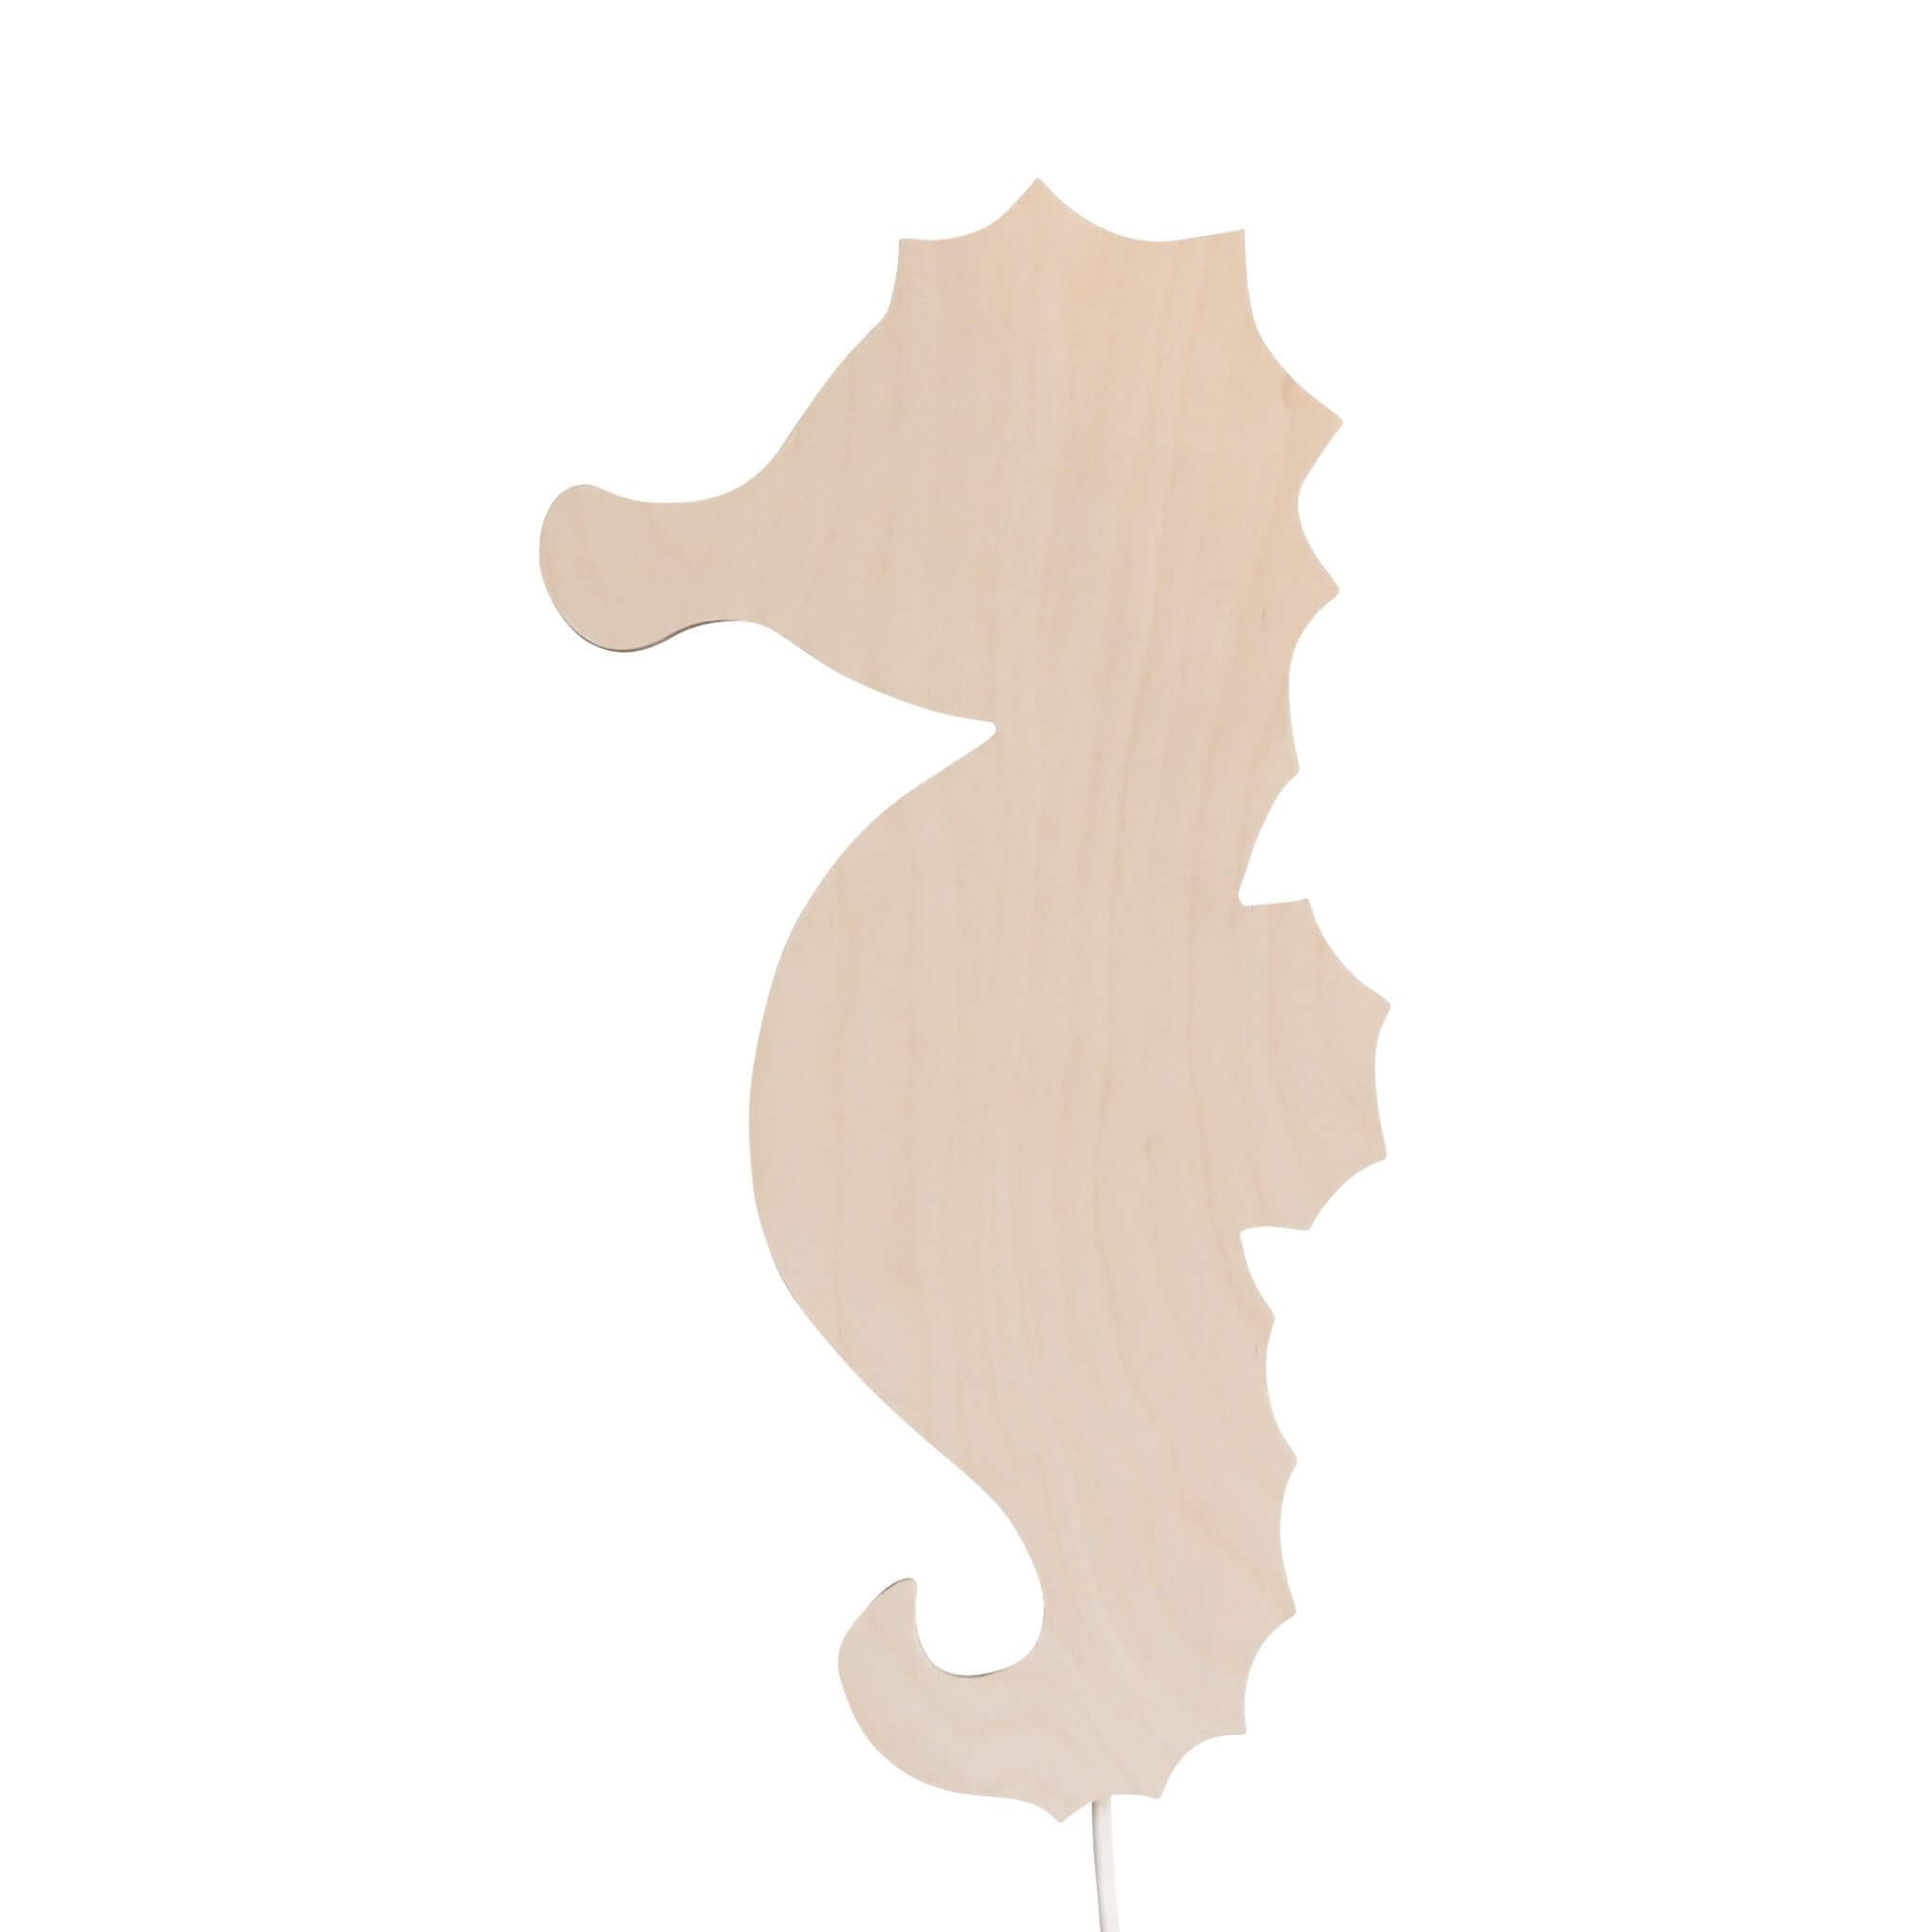 Wooden children’s room wall lamp | Seahorse - toddie.com